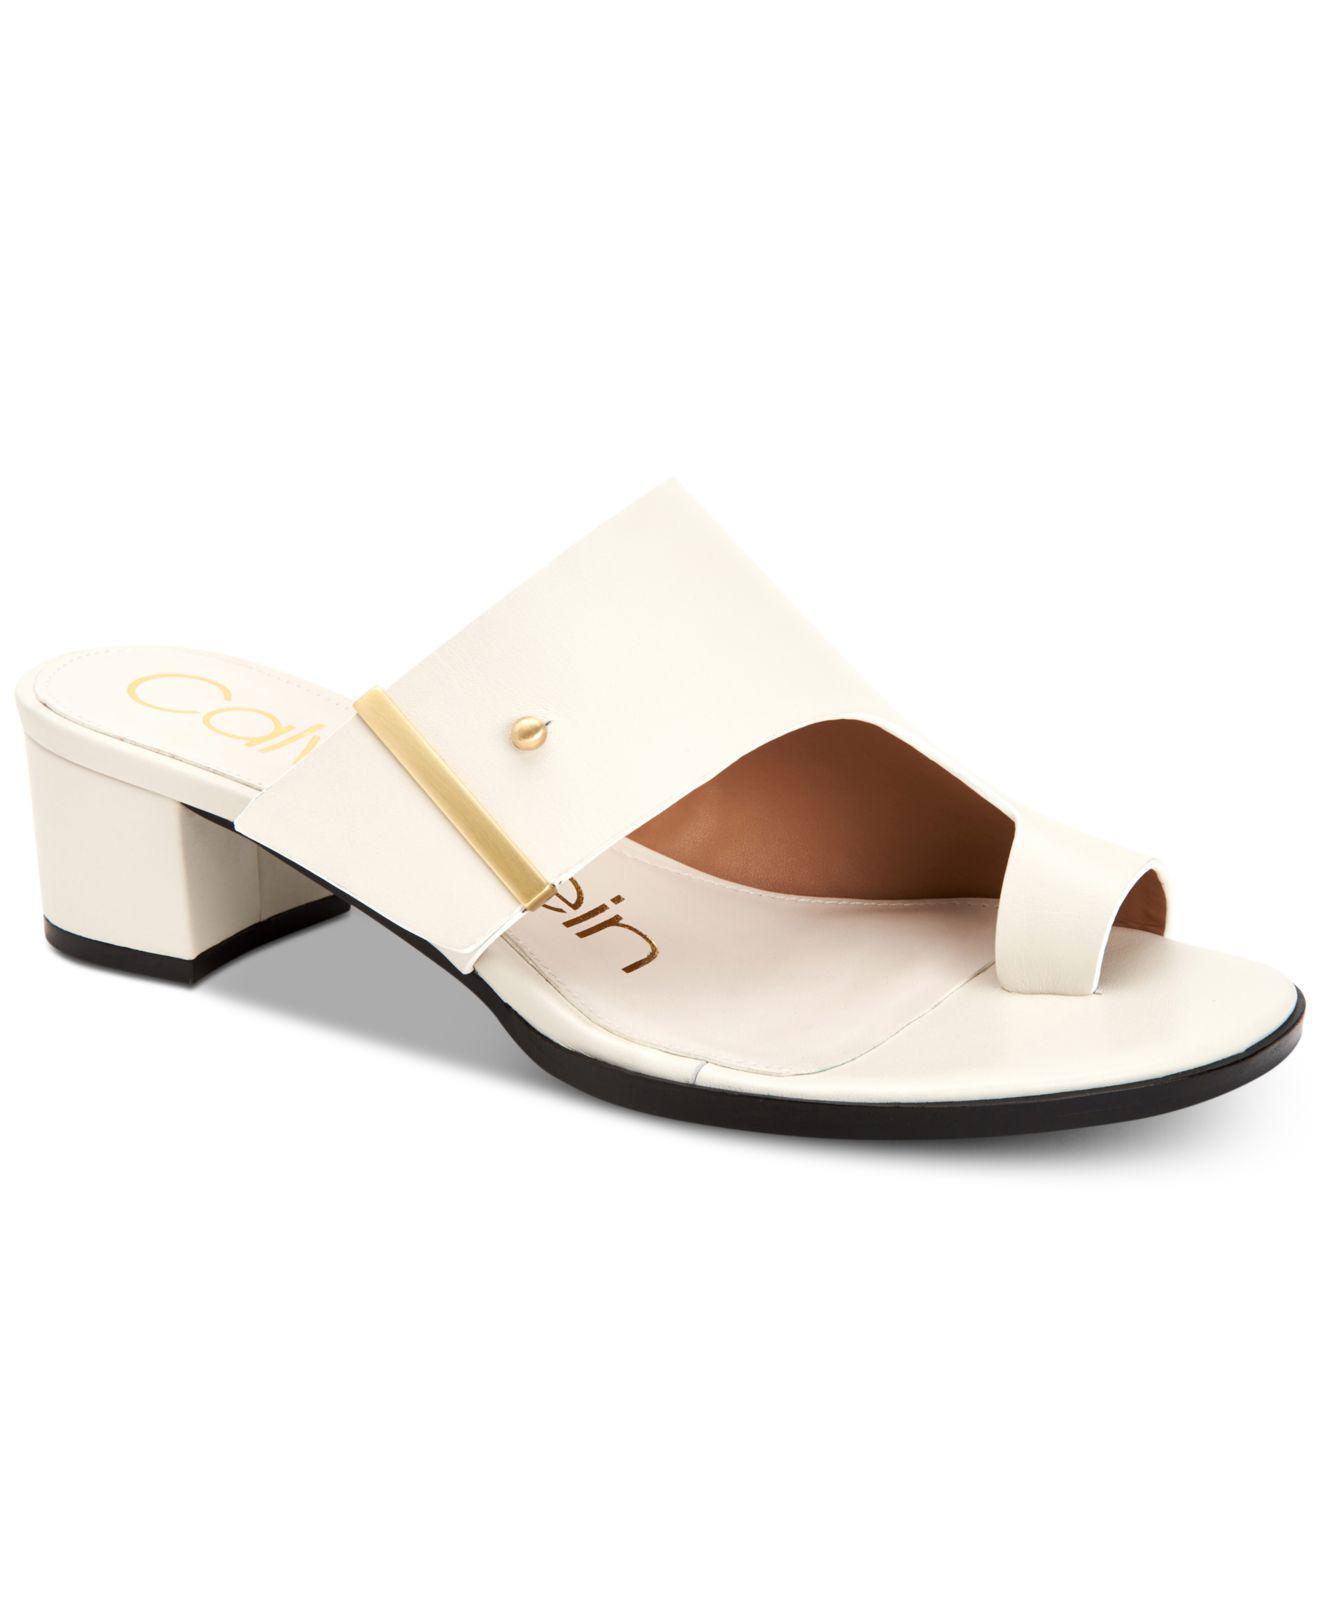 Lyst - Calvin Klein Daria Dress Sandals, Created For Macy's in White